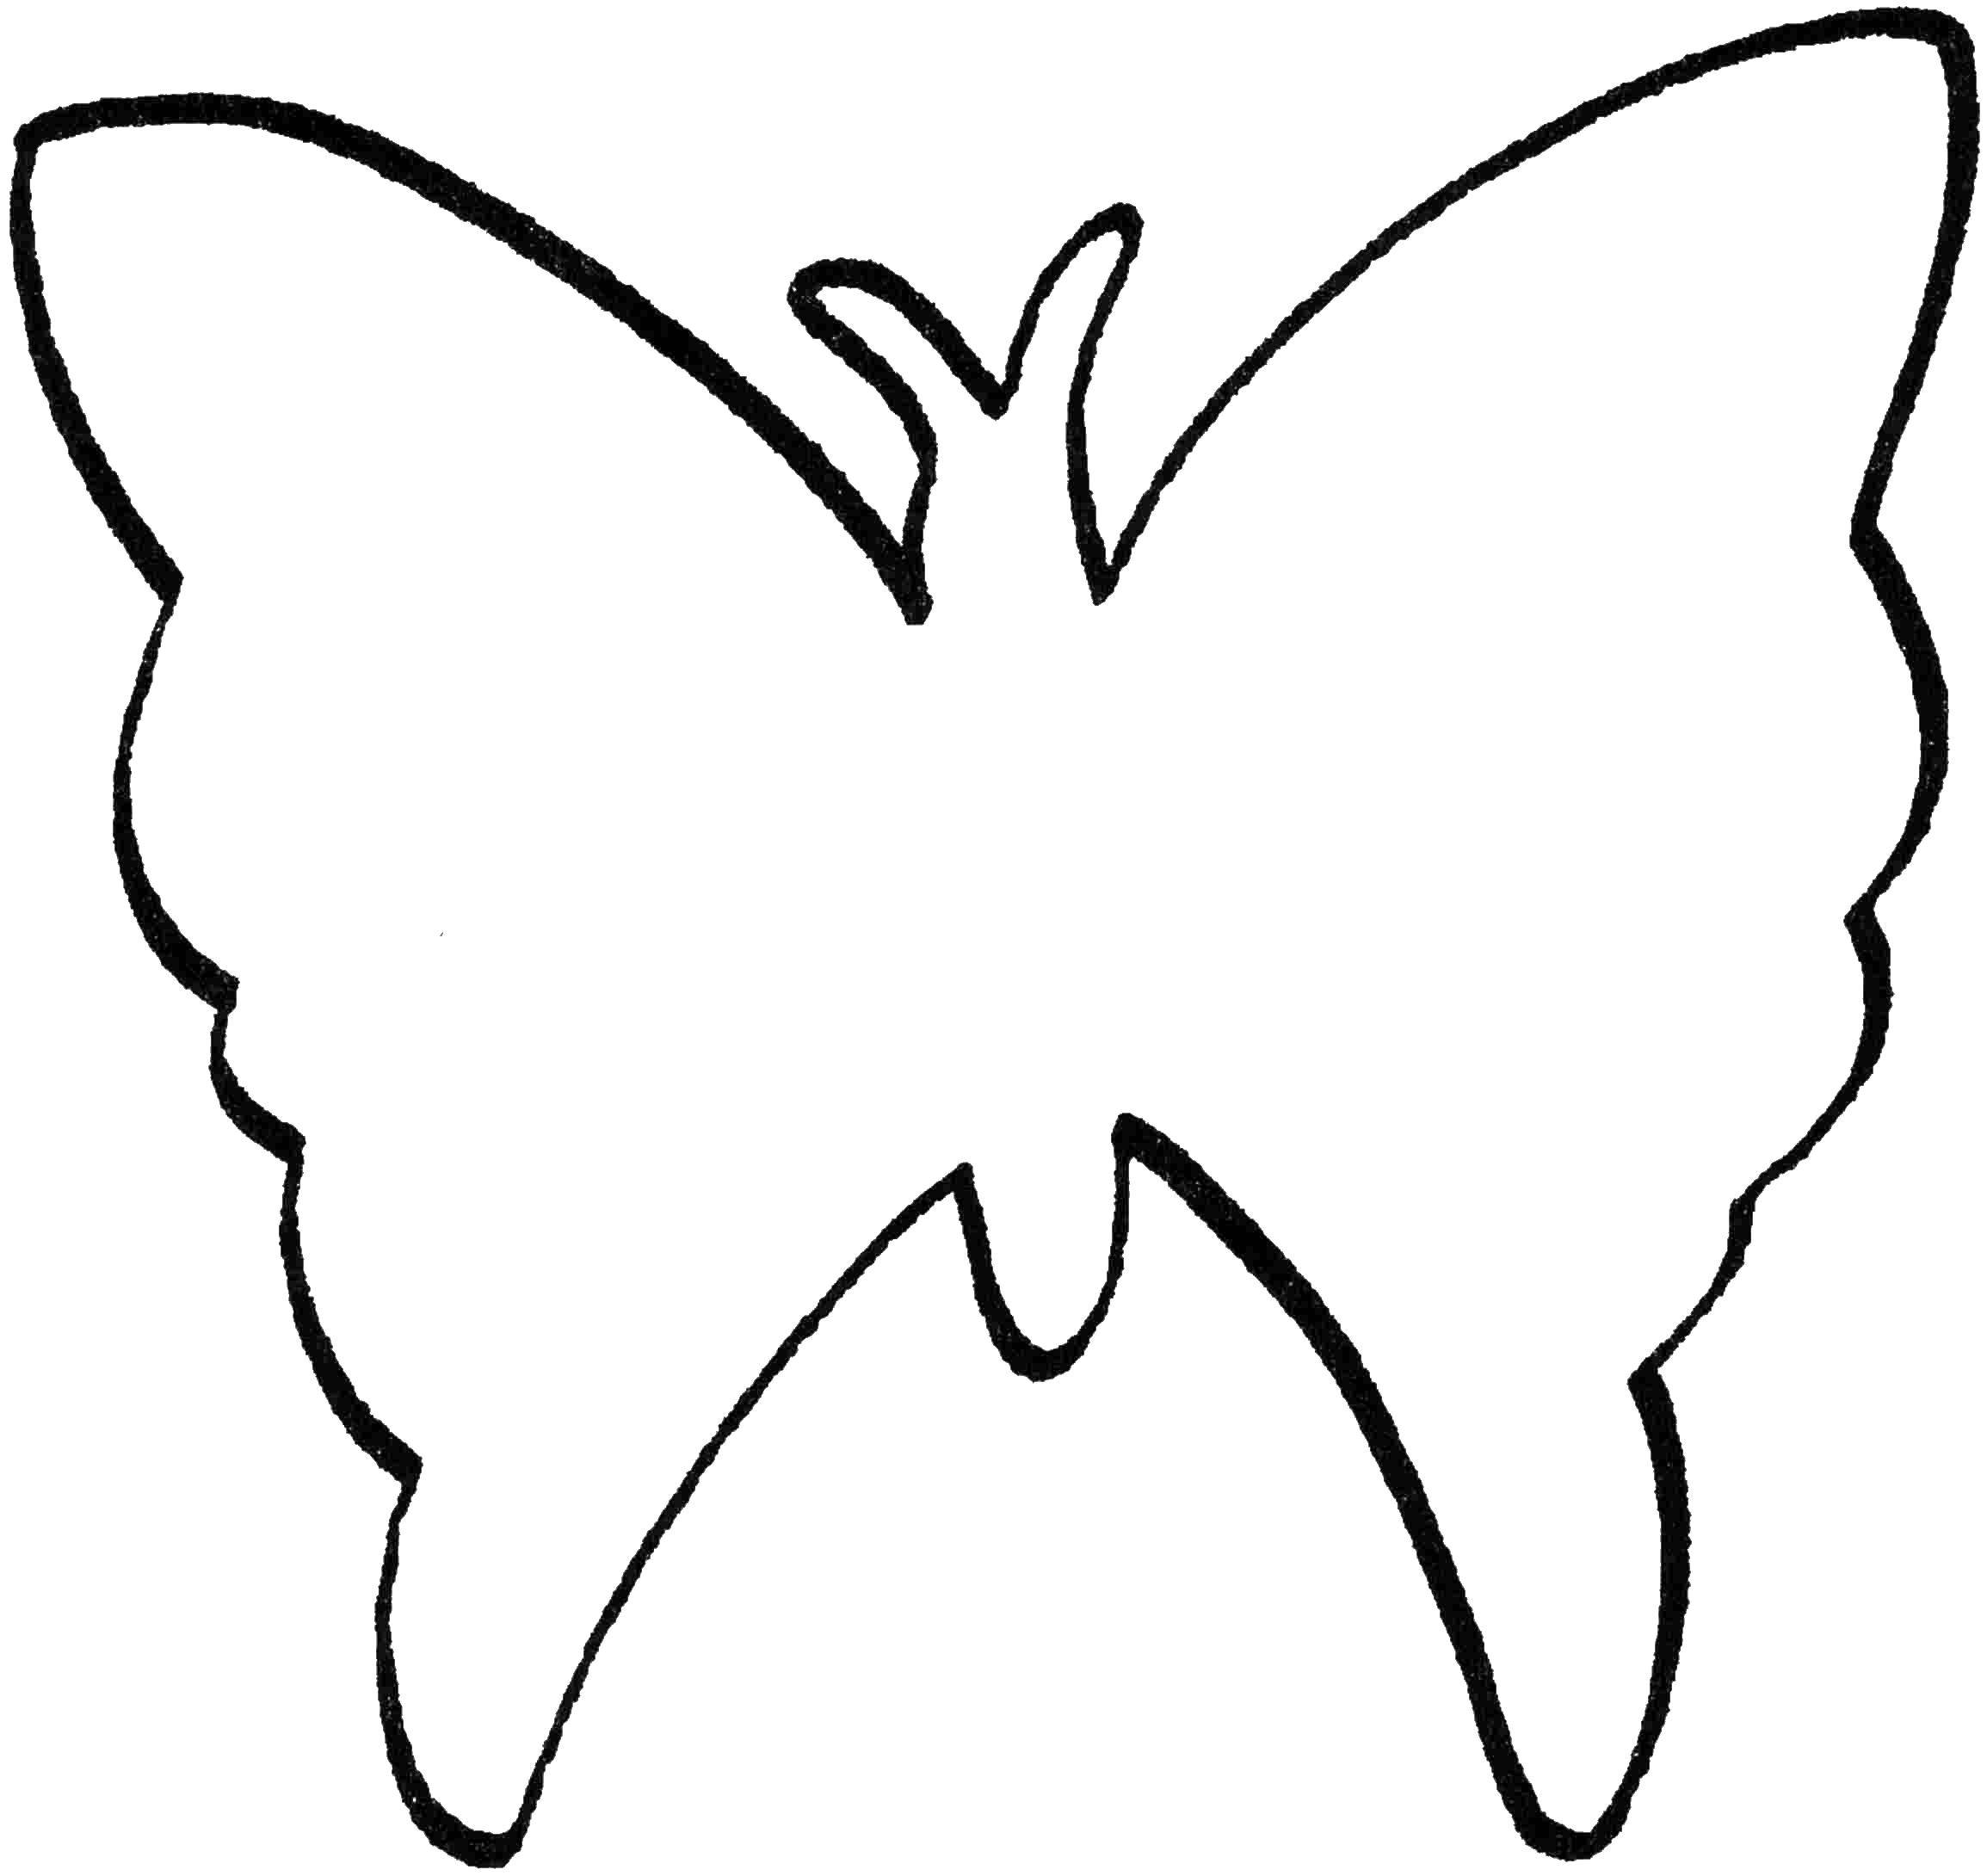 Coloring Butterfly pattern to cut out. Category Butterfly. Tags:  butterfly, contour, wings.